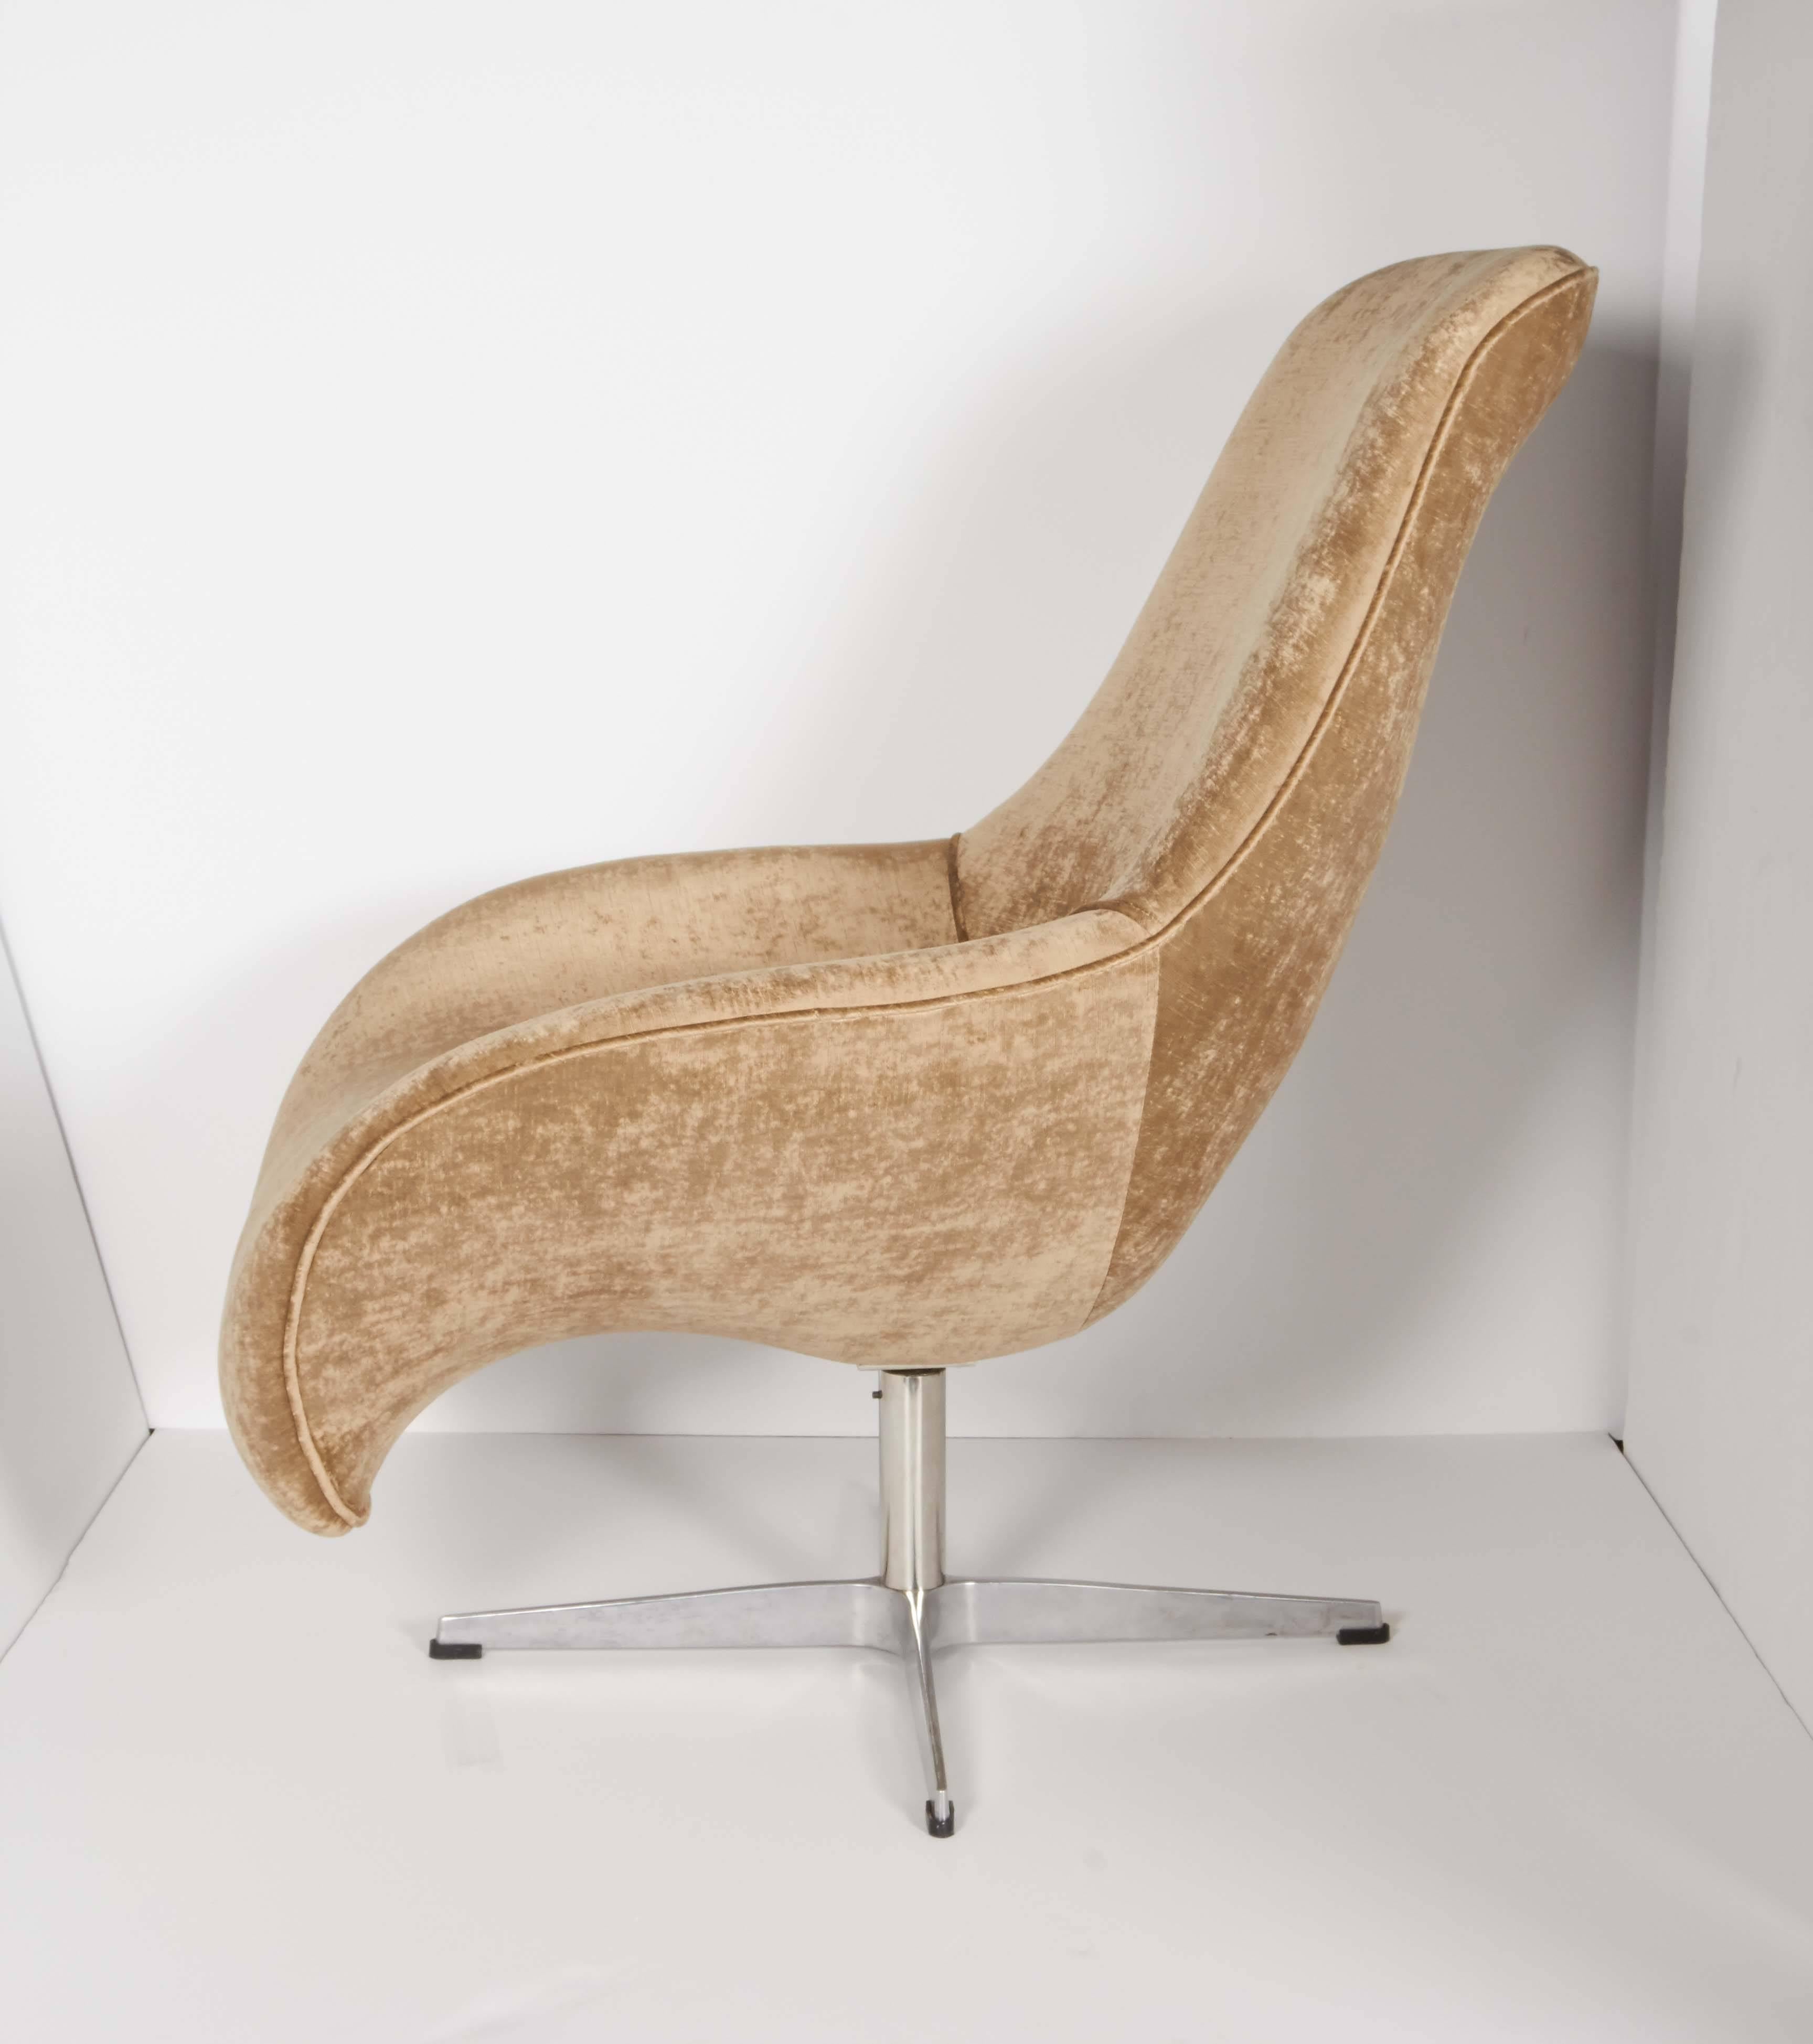 Outstanding modernist lounge chair or scoop chair with curved form. Newly upholstered in luxe metallic taupe velvet. The chair features swivel seat and has 